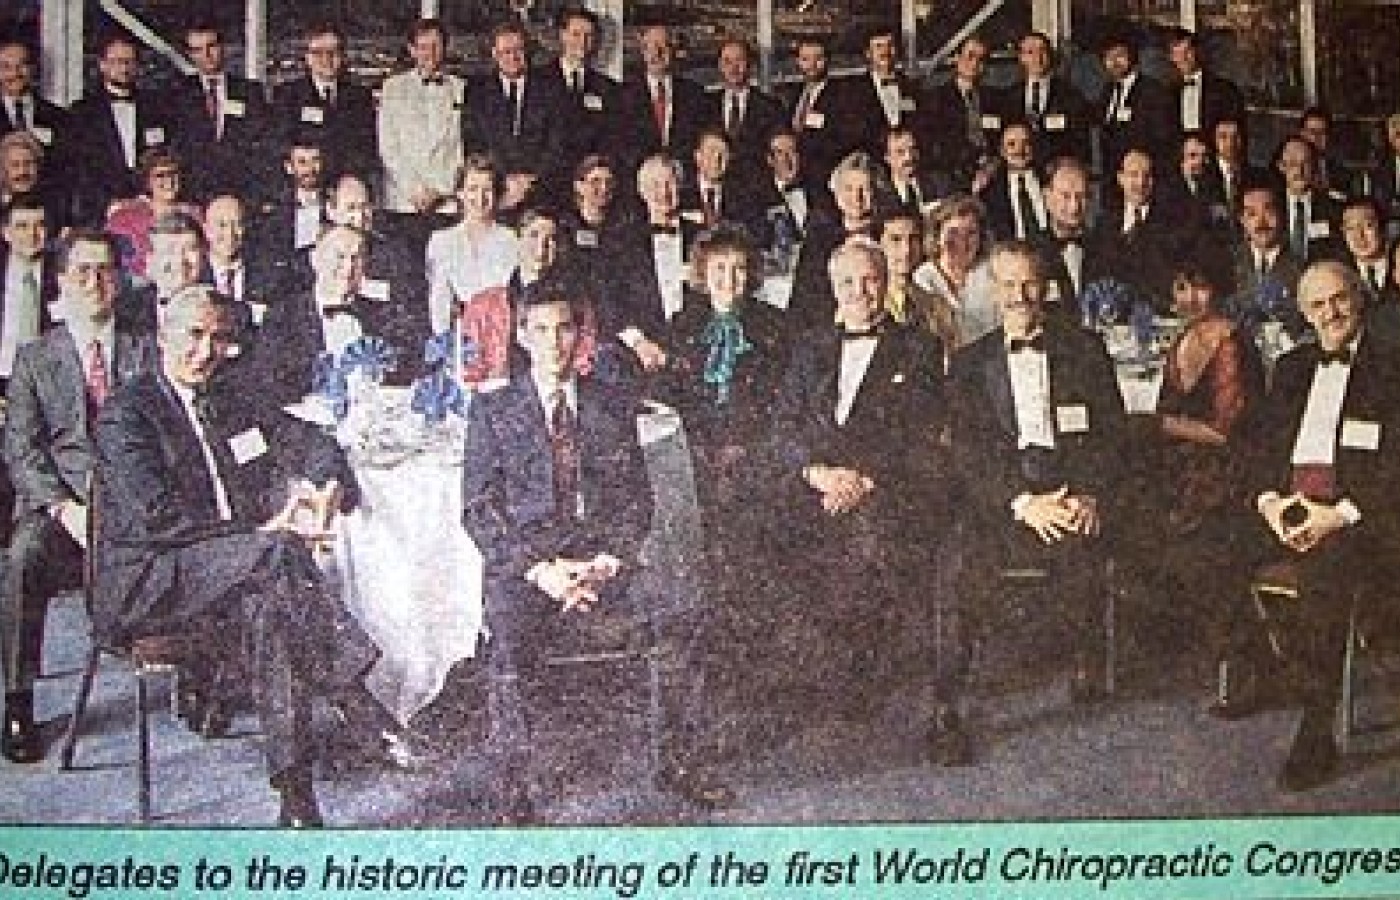 Delegates to the historic meeting of the first World Chiropractic Congress